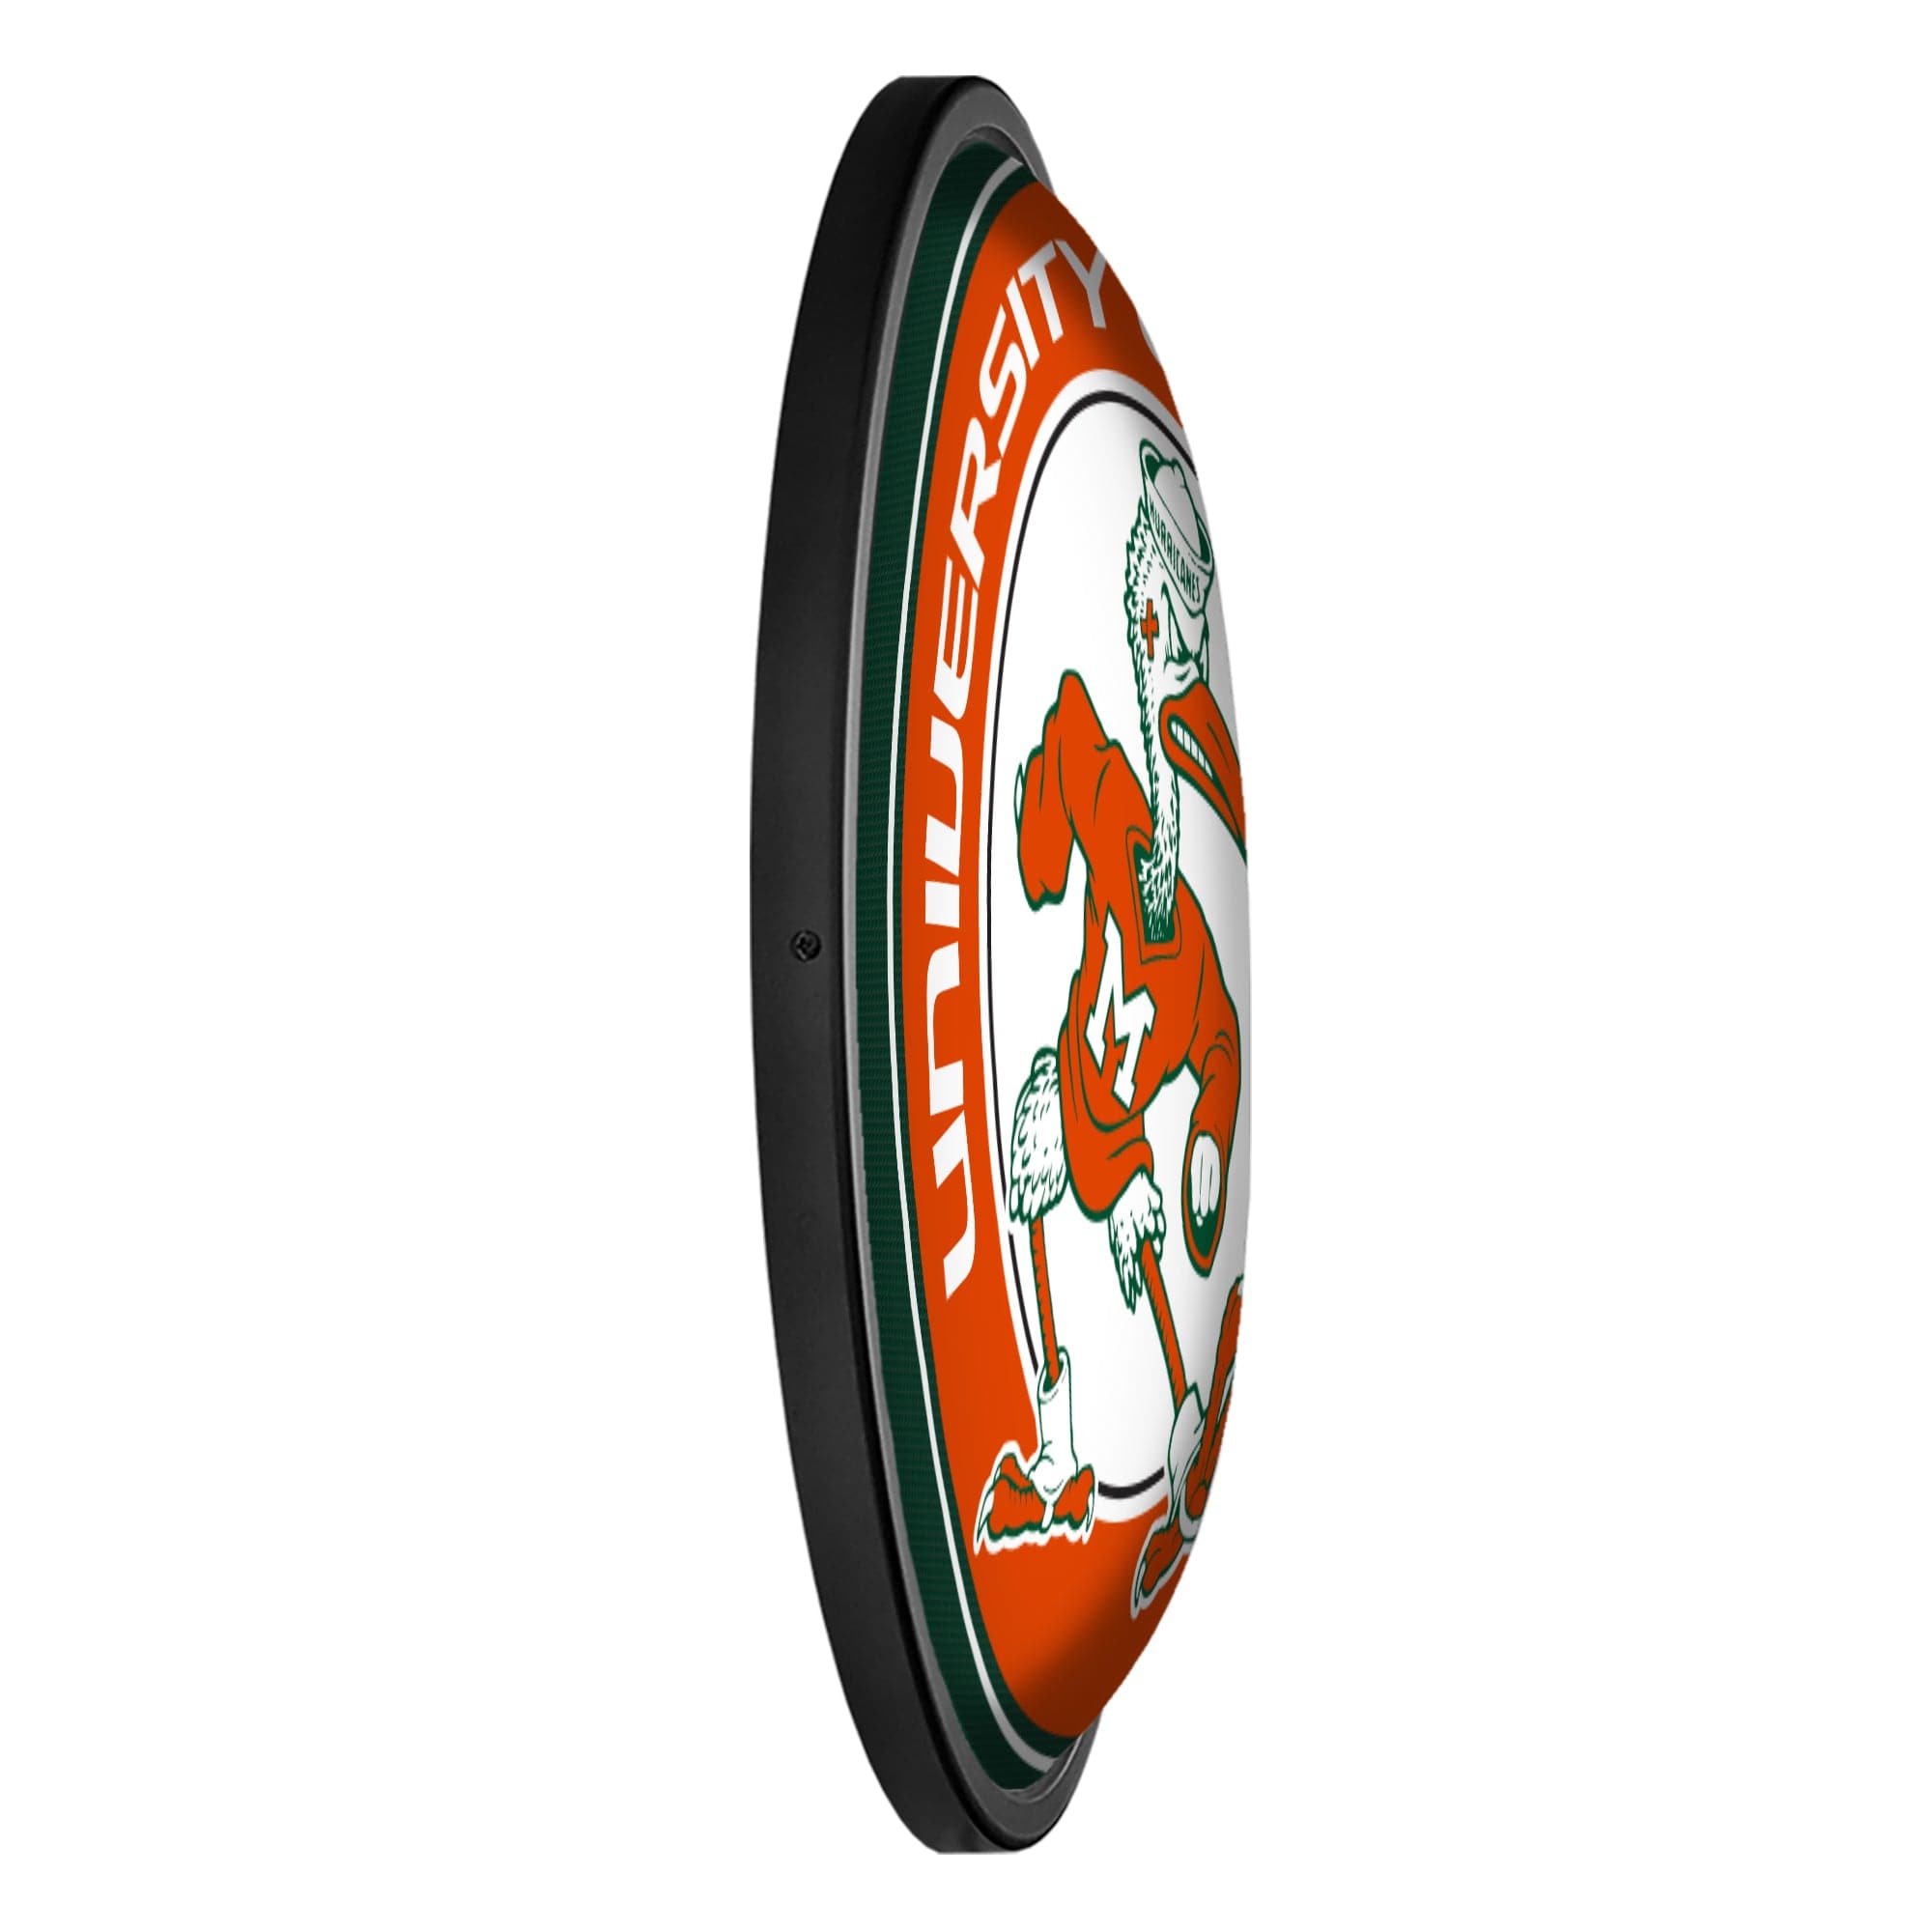 Philadelphia Phillies: Original Oval Rotating Lighted Wall Sign - The  Fan-Brand